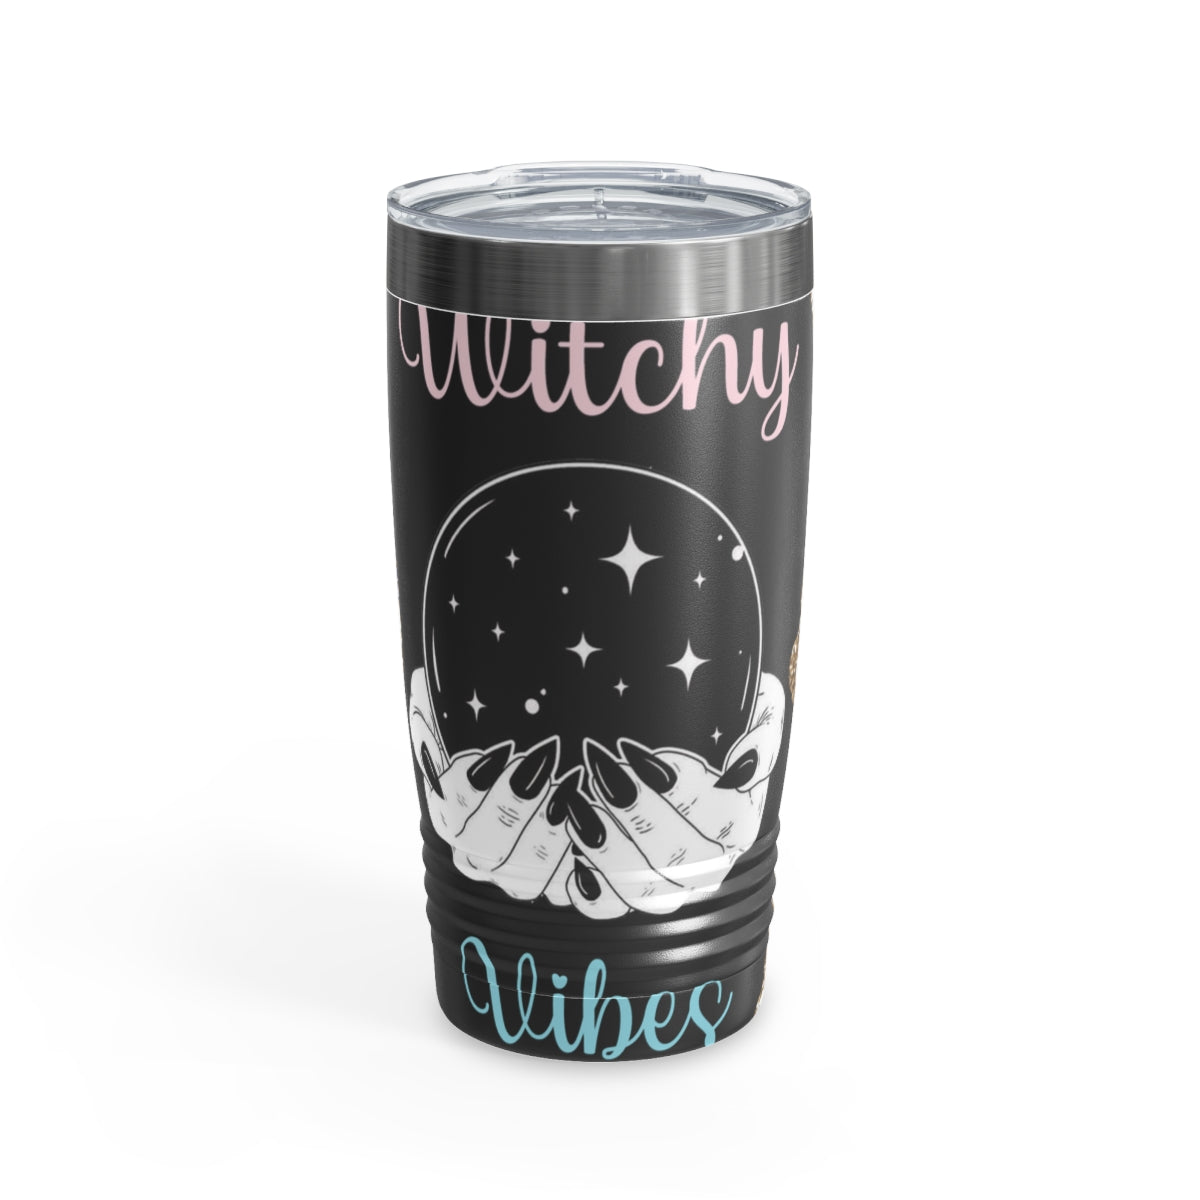 Witchy Vibes Ring-neck Tumbler, 20oz